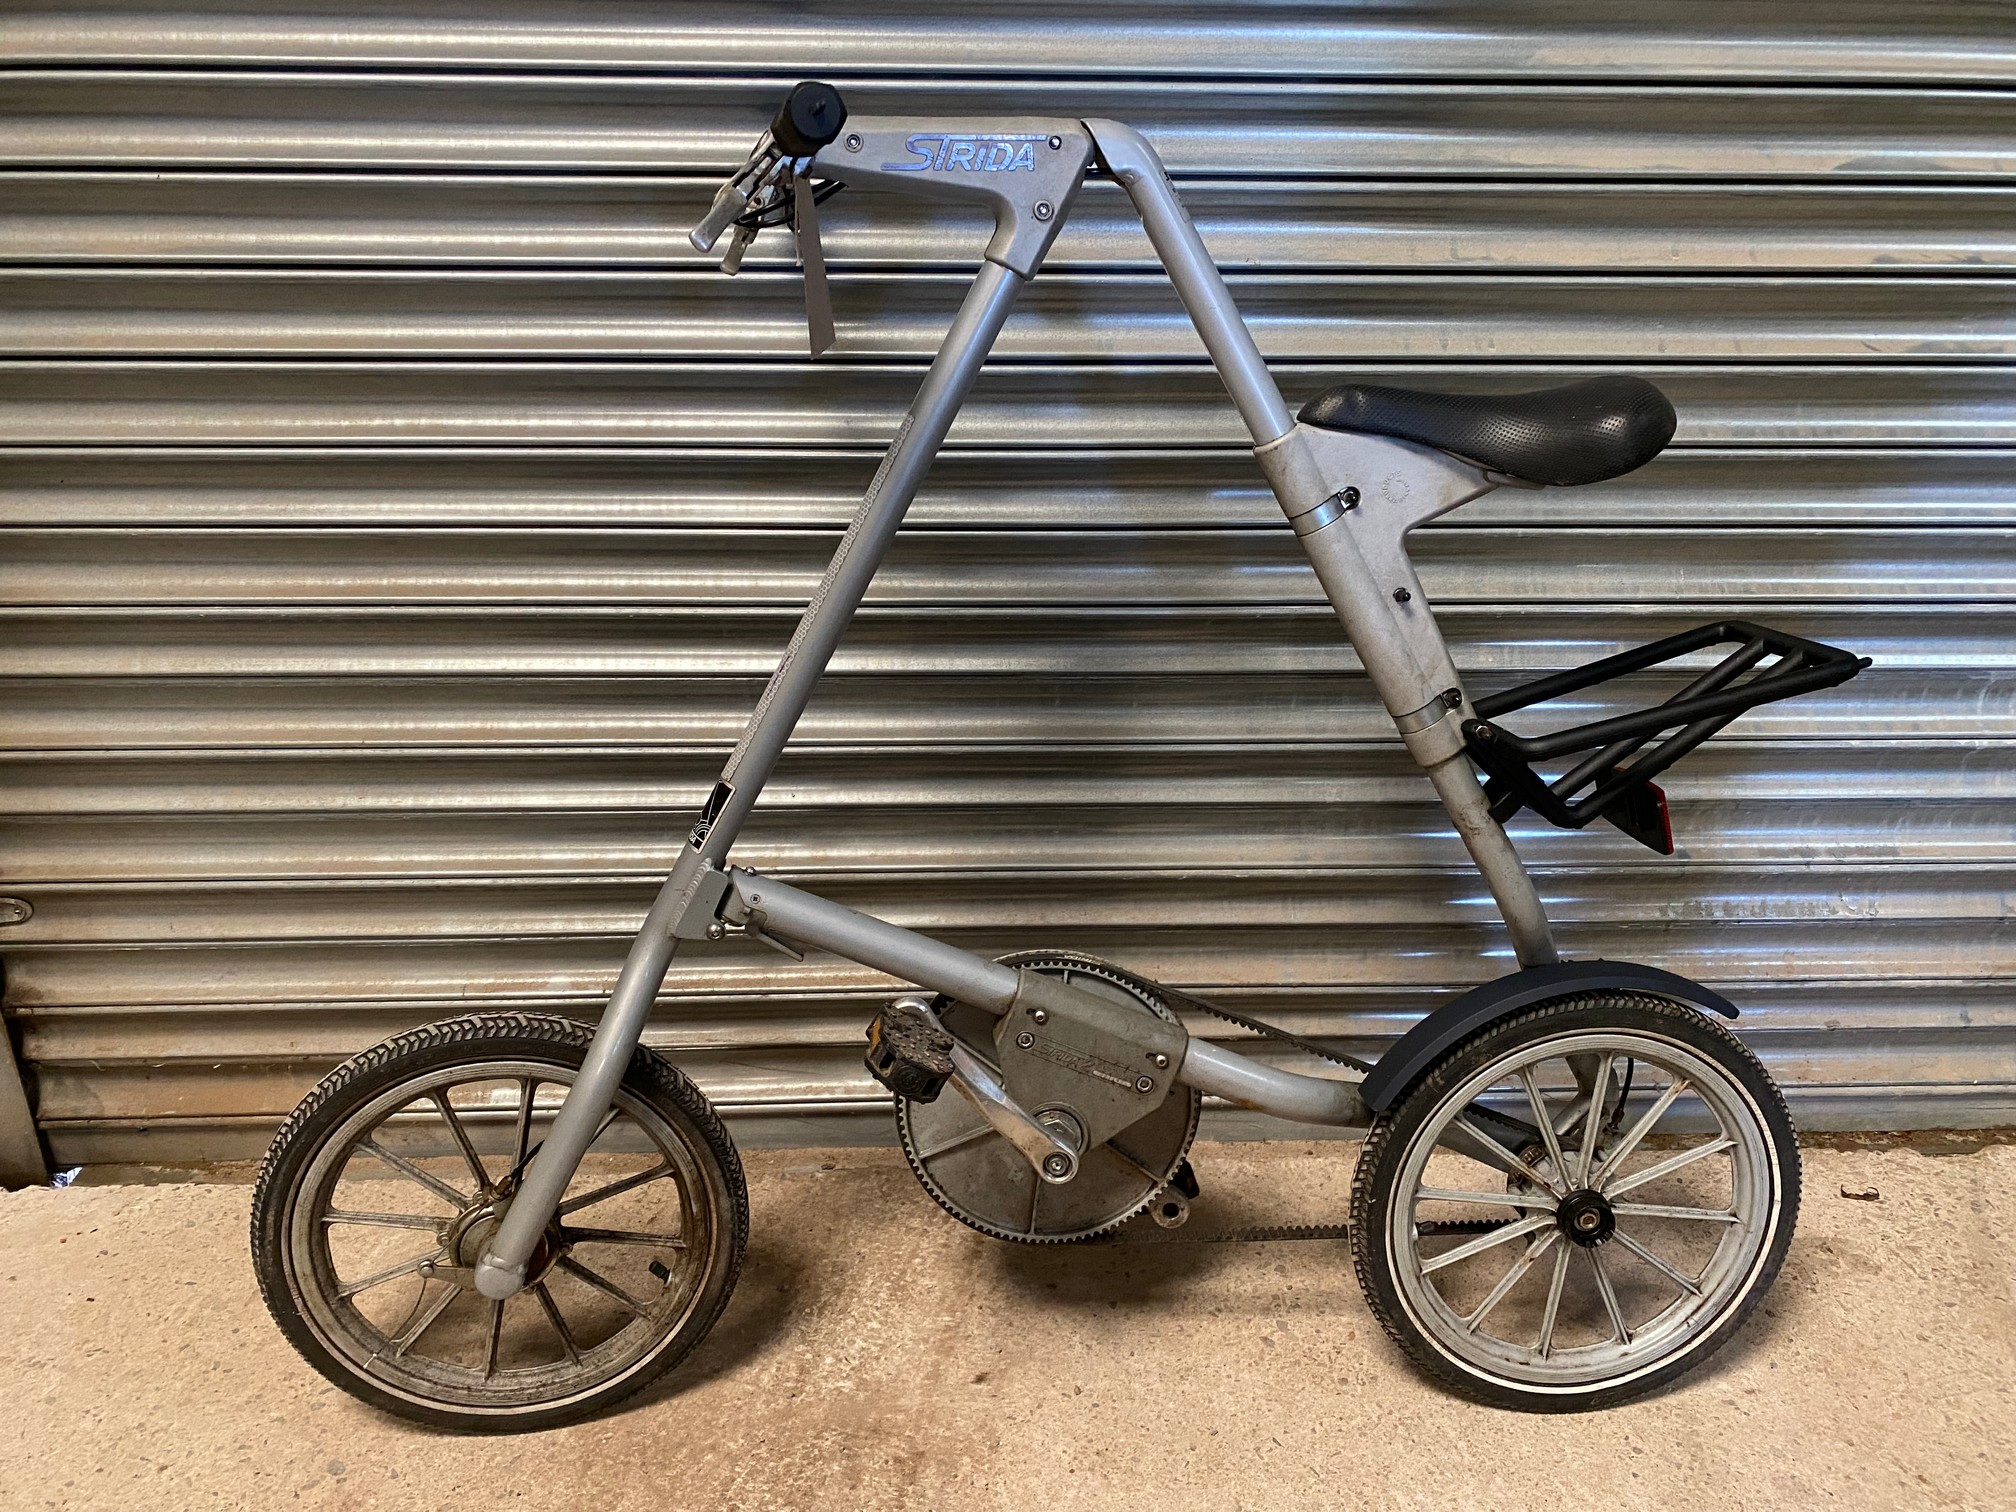 A Strida bicycle.